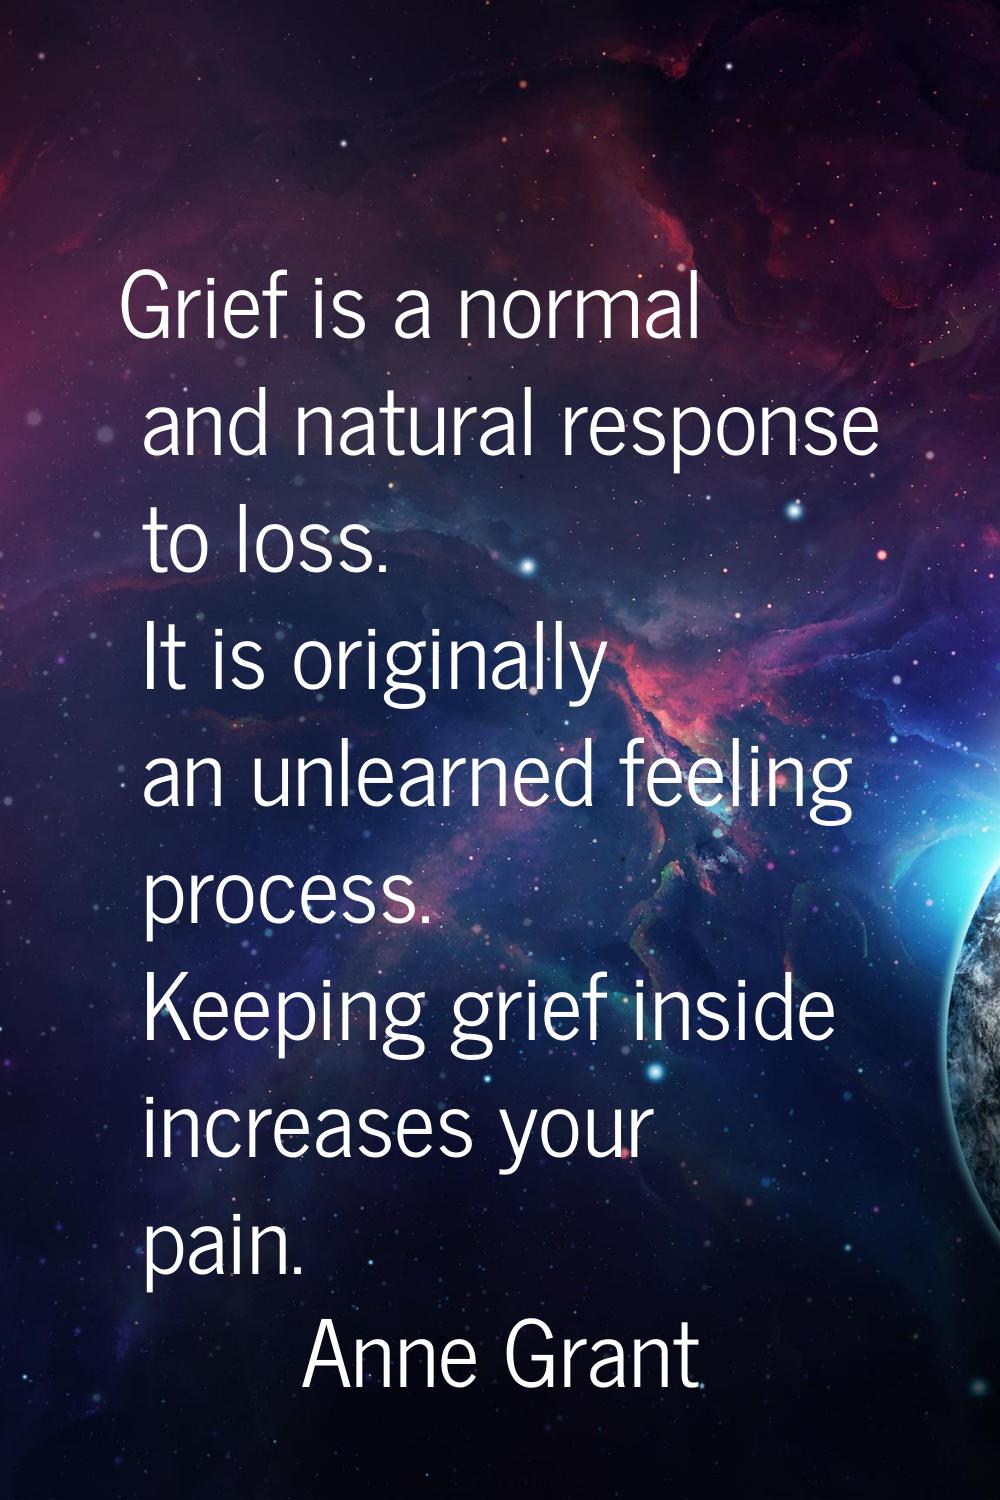 Grief is a normal and natural response to loss. It is originally an unlearned feeling process. Keep